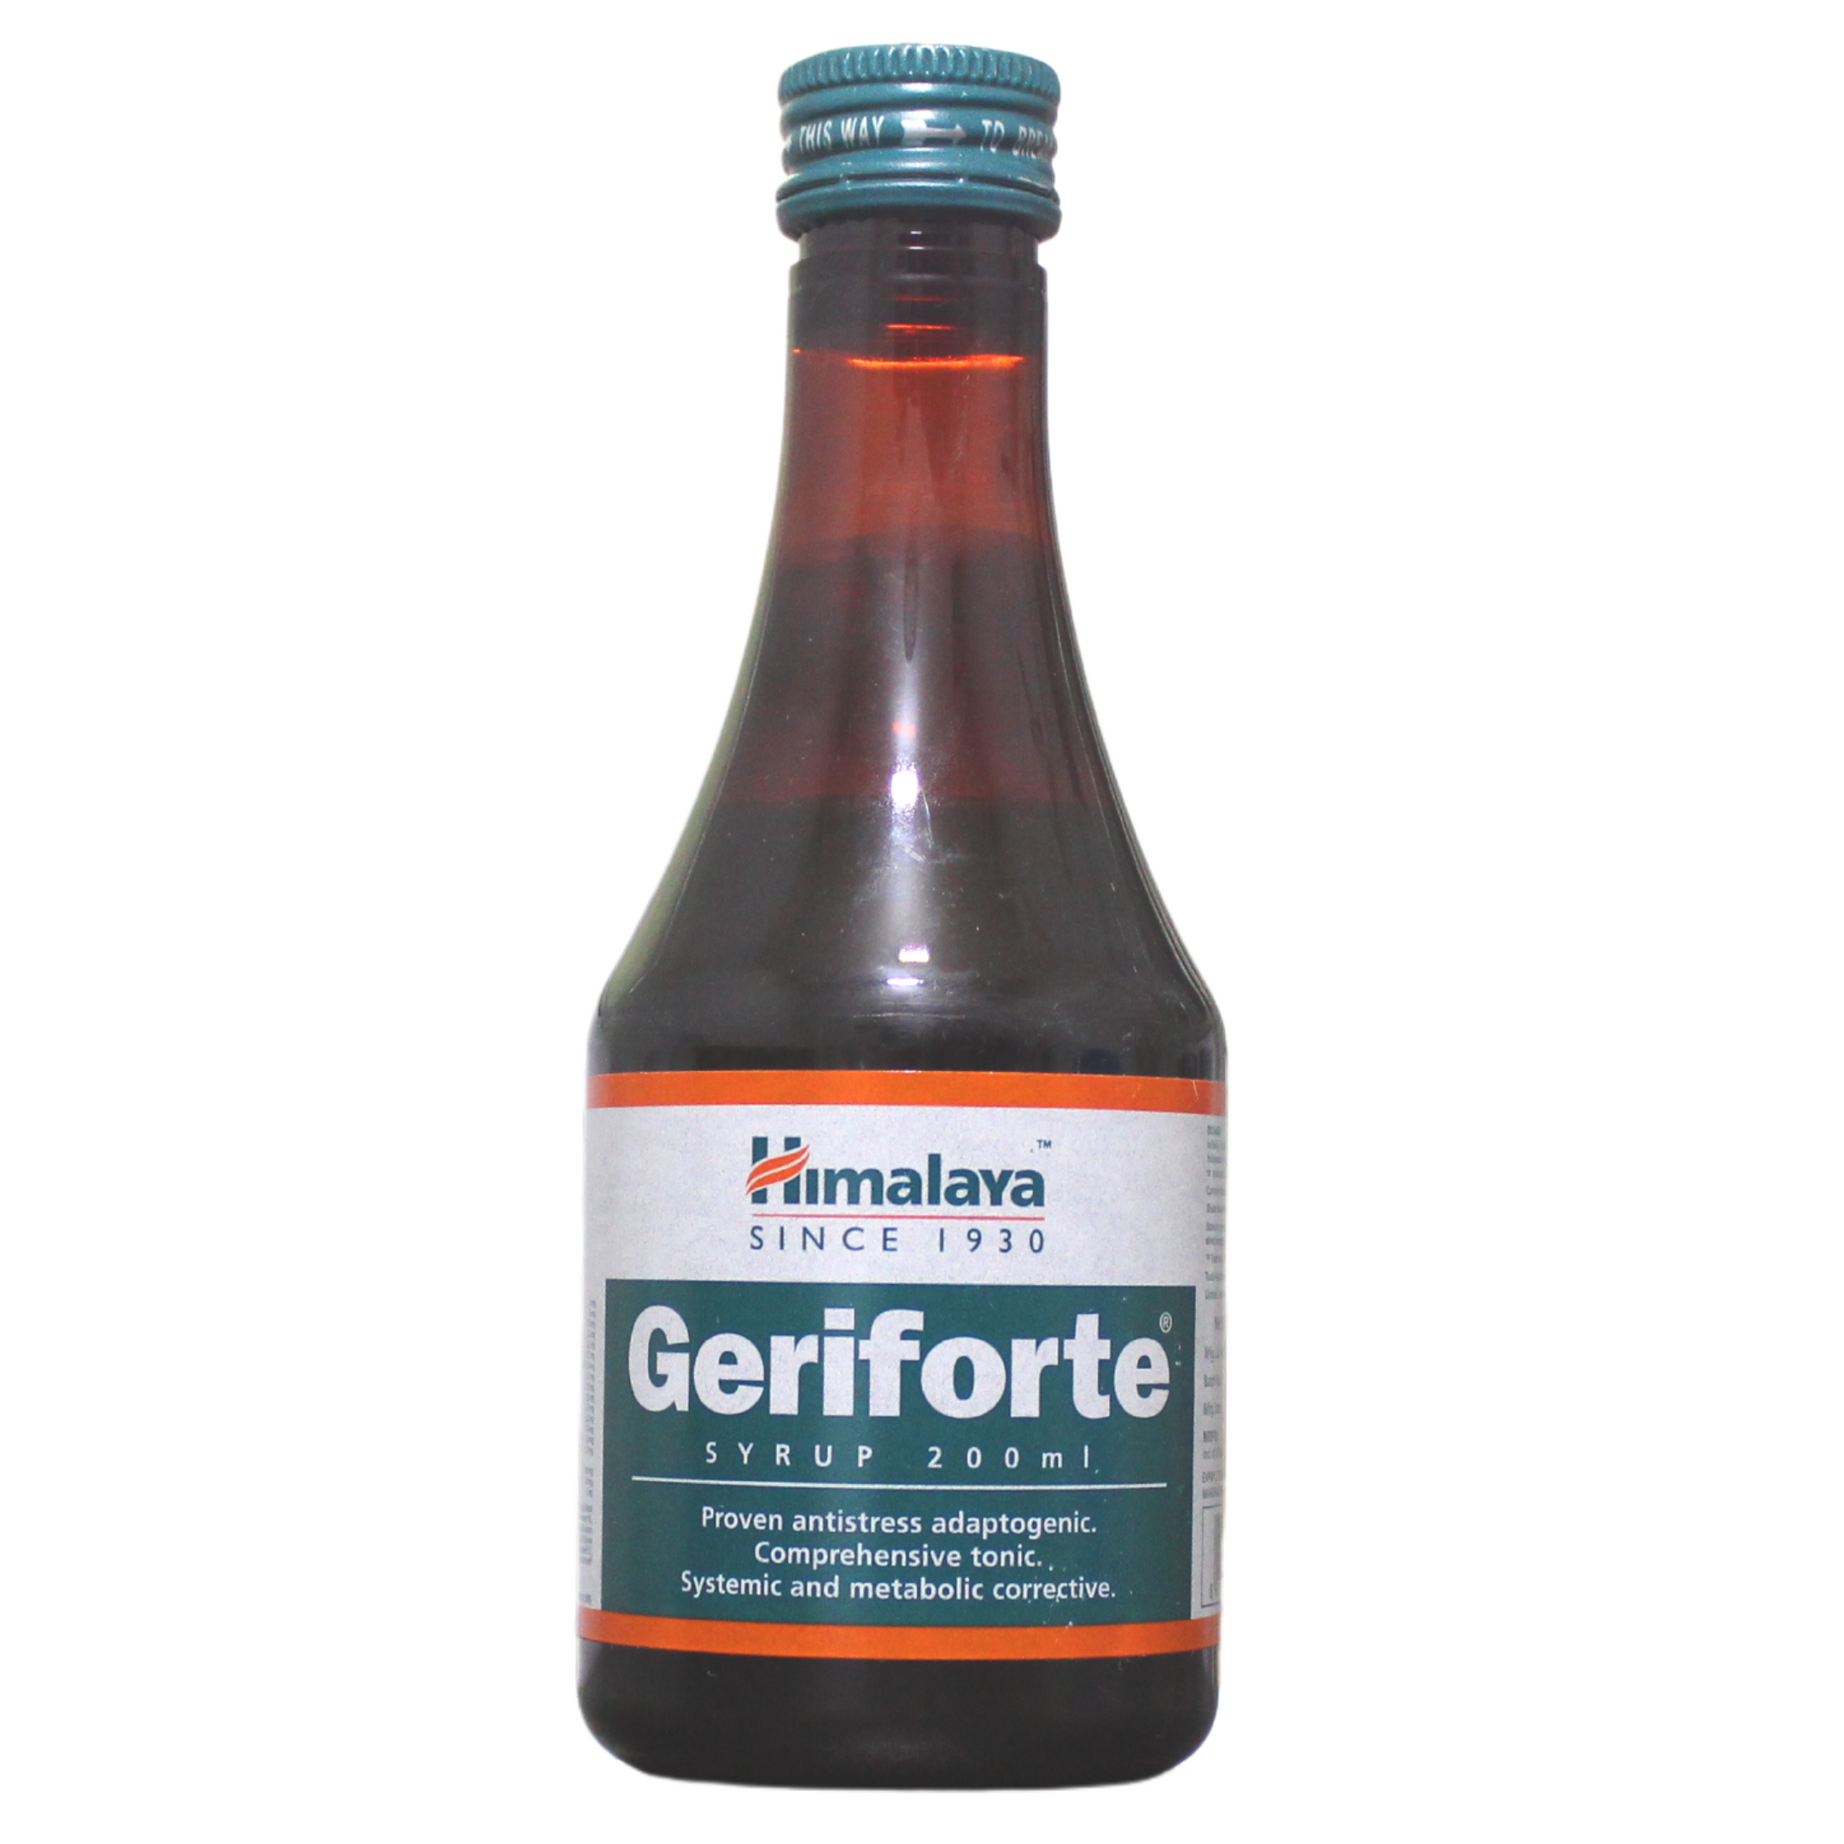 Shop Geriforte Syrup 200ml at price 125.00 from Himalaya Online - Ayush Care